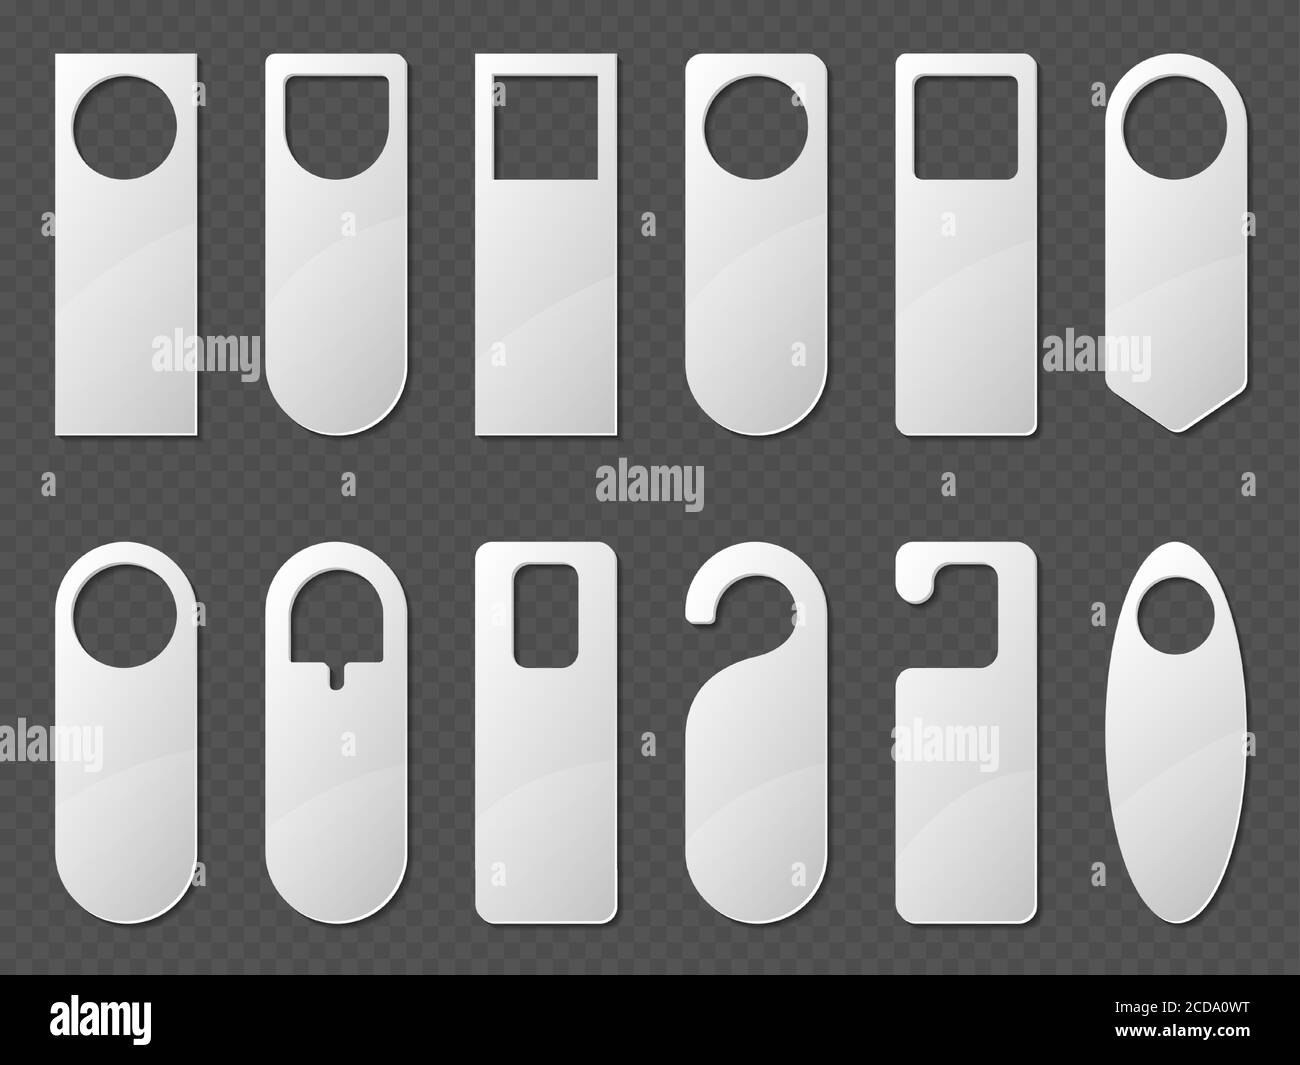 Door hangers mockup set. Blank paper or plastic empty labels of various shapes for hotel doorknob room, dont disturb signs, messages on entrance knobs, Realistic 3d vector illustration, icons, mock up Stock Vector